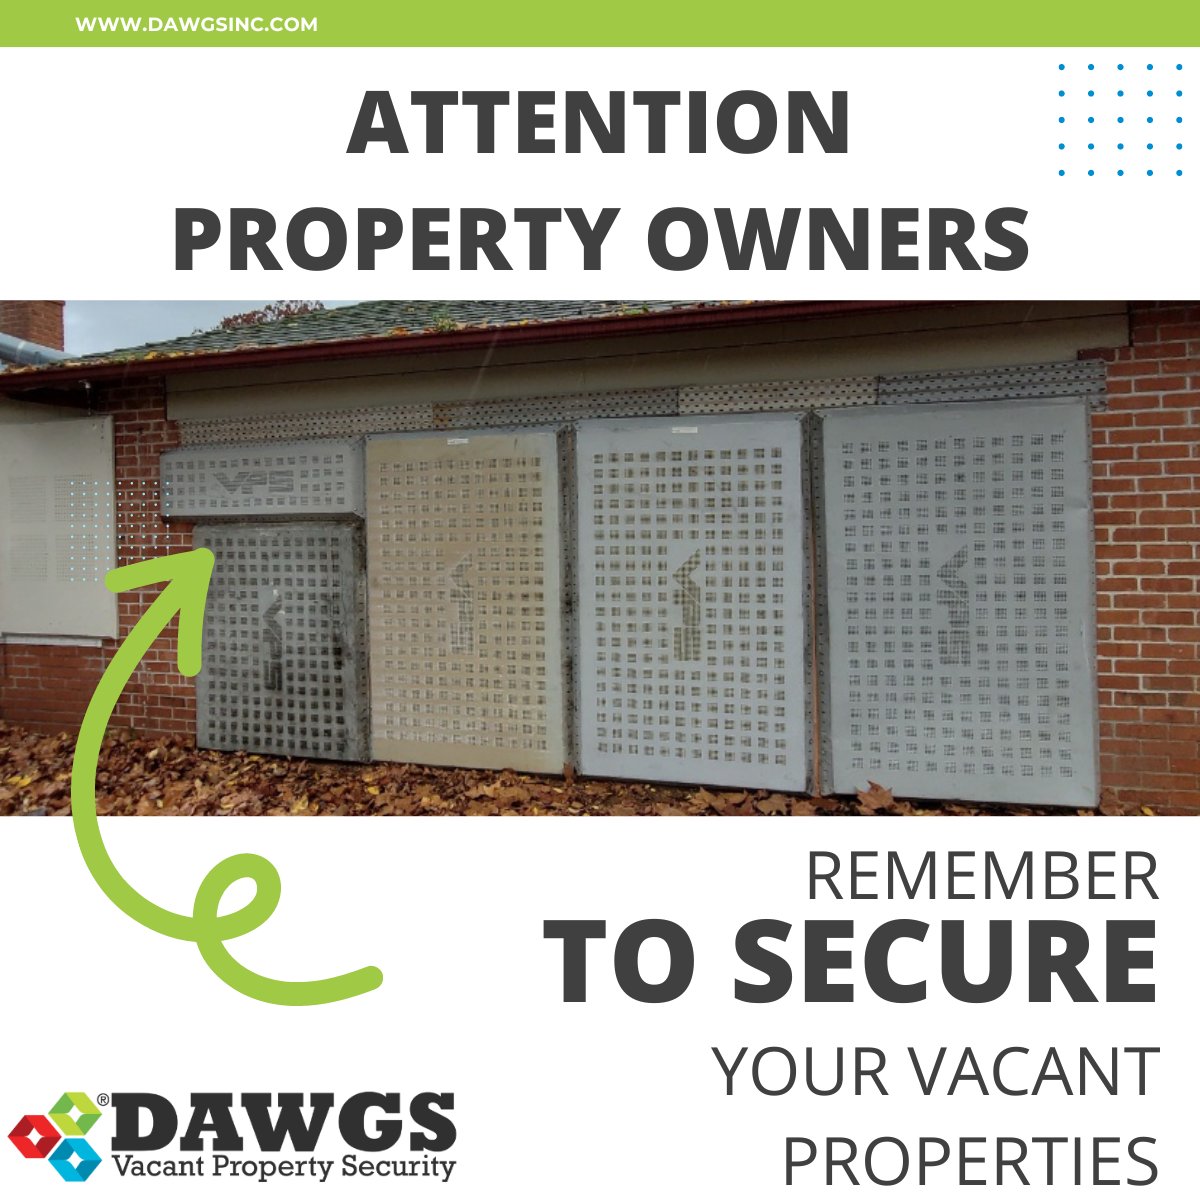 🔒 Don't forget to lock up before the weekend! Property owners, ensure your vacant properties are secure before you kick off the weekend fun. Safety first! #WeekendPrep #PropertyOwners